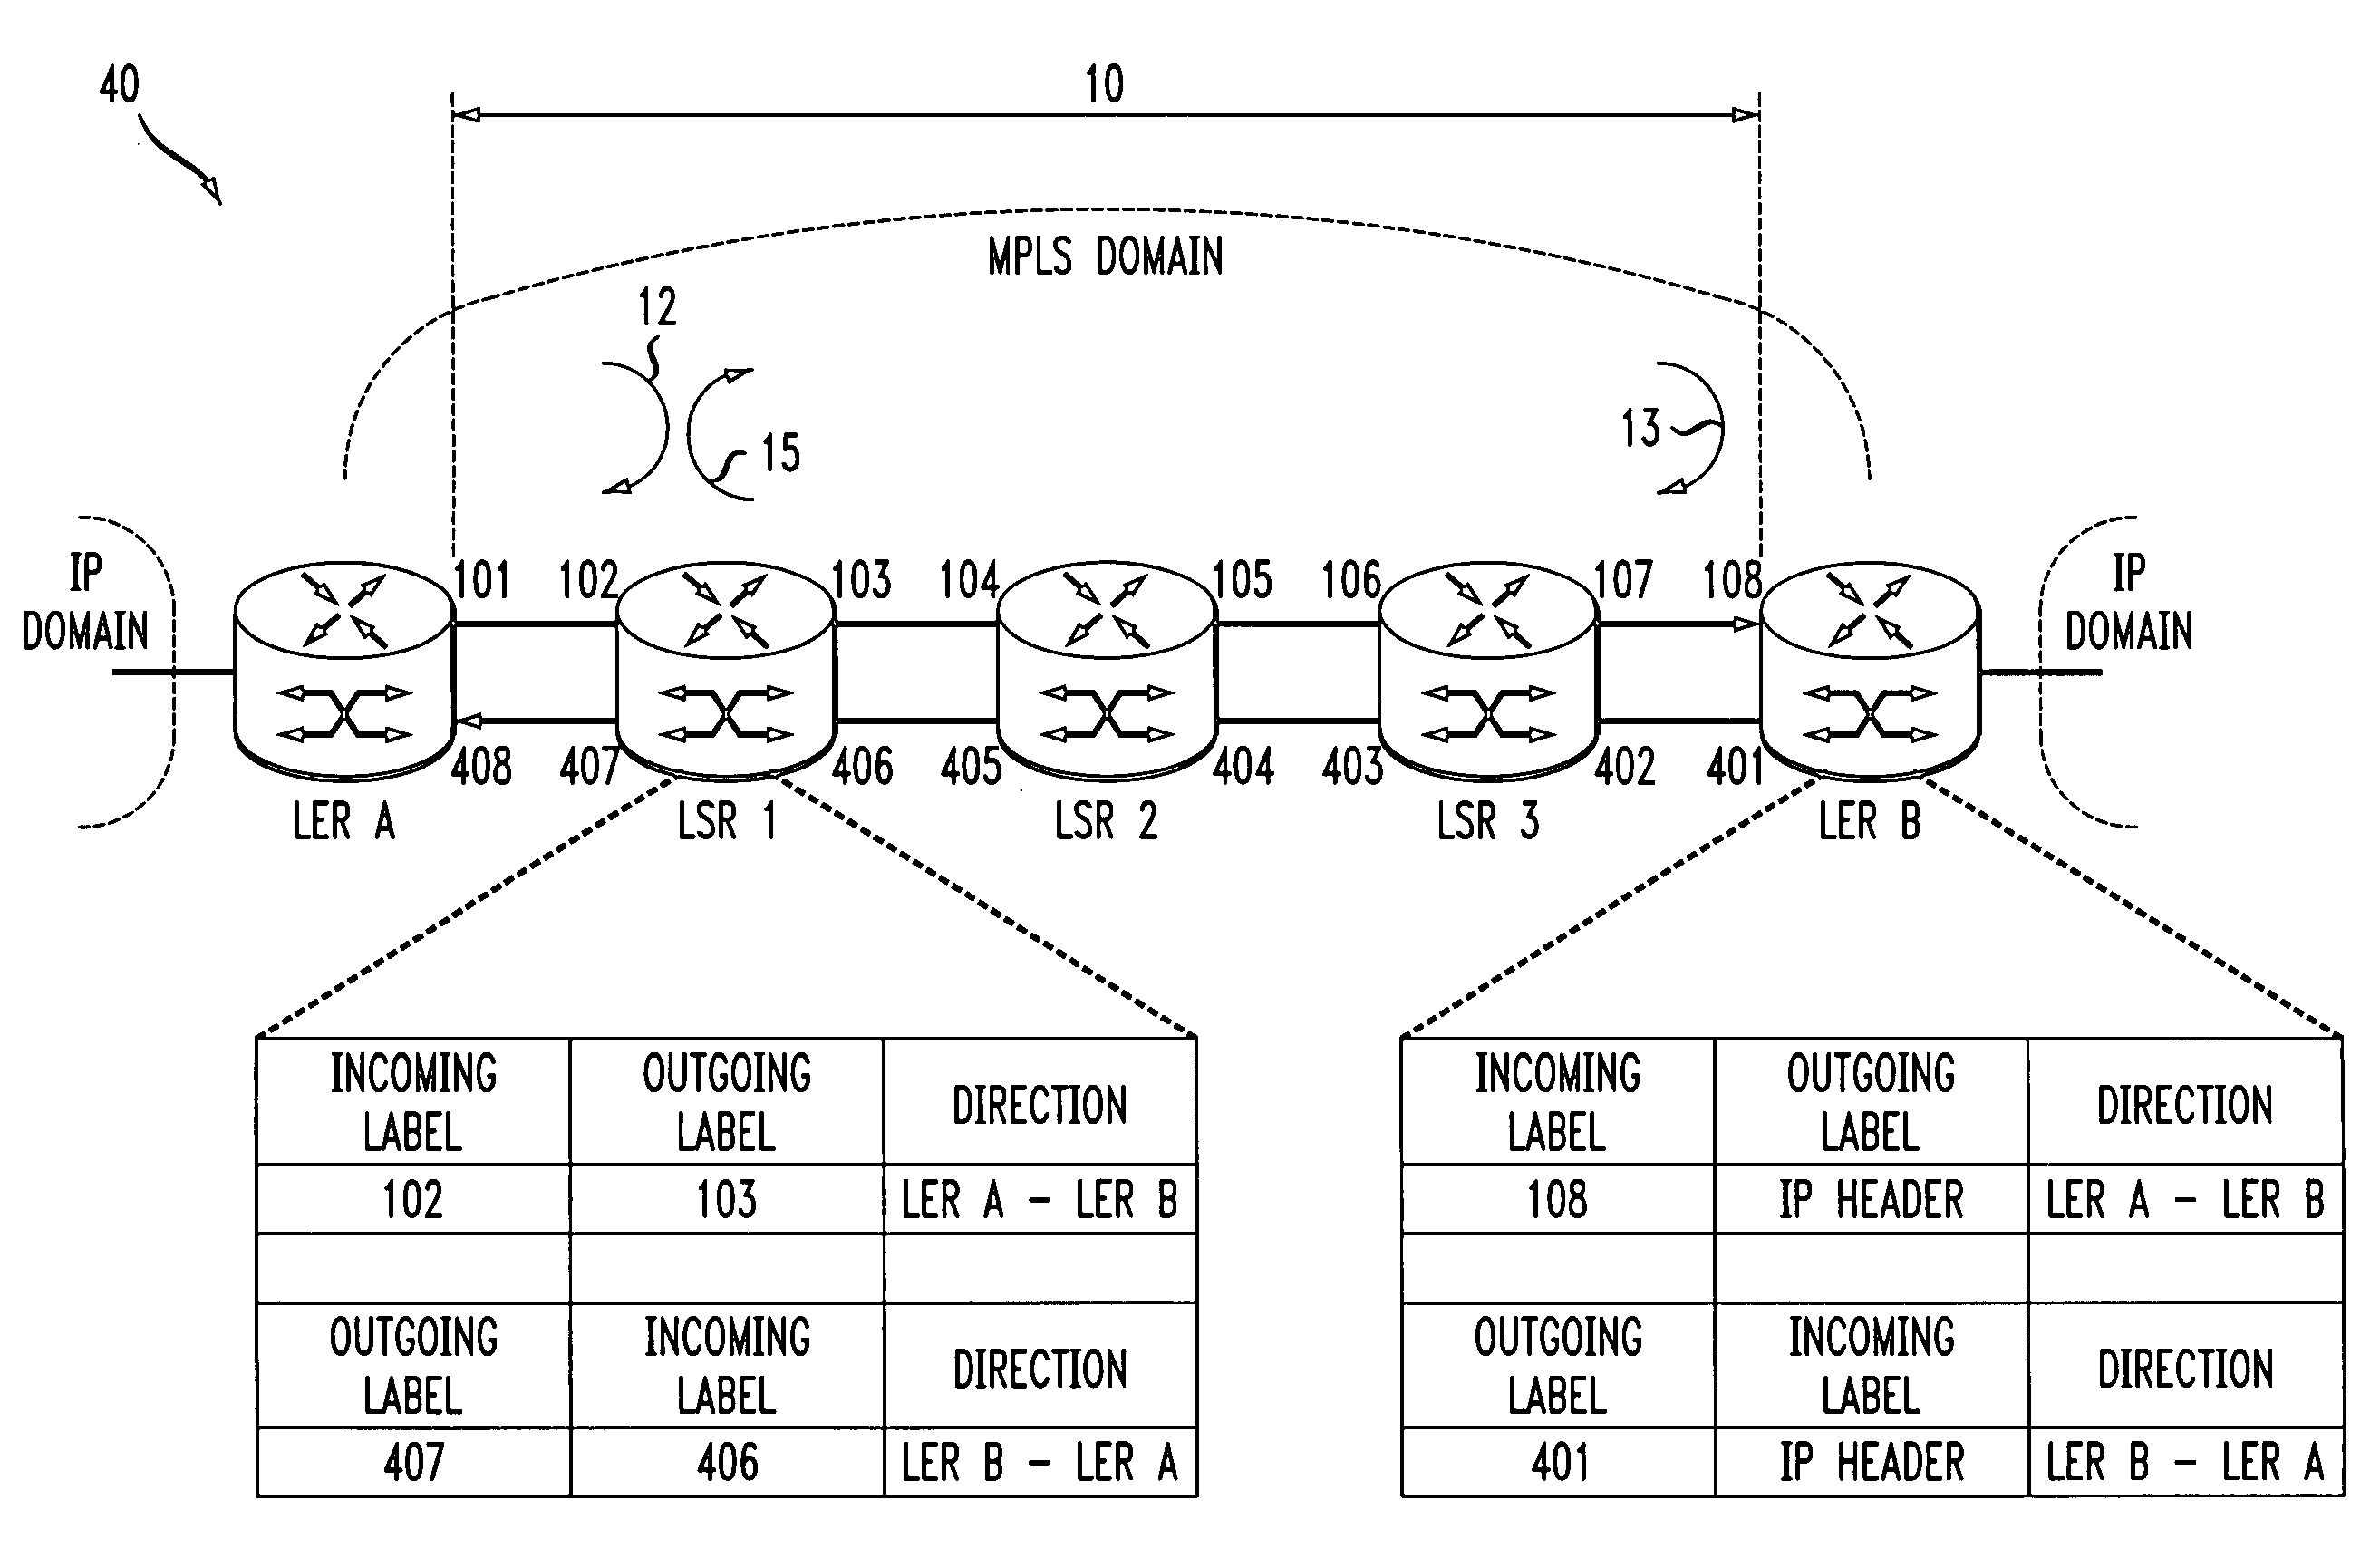 Loopback capability for bi-directional multi-protocol label switching traffic engineered trucks